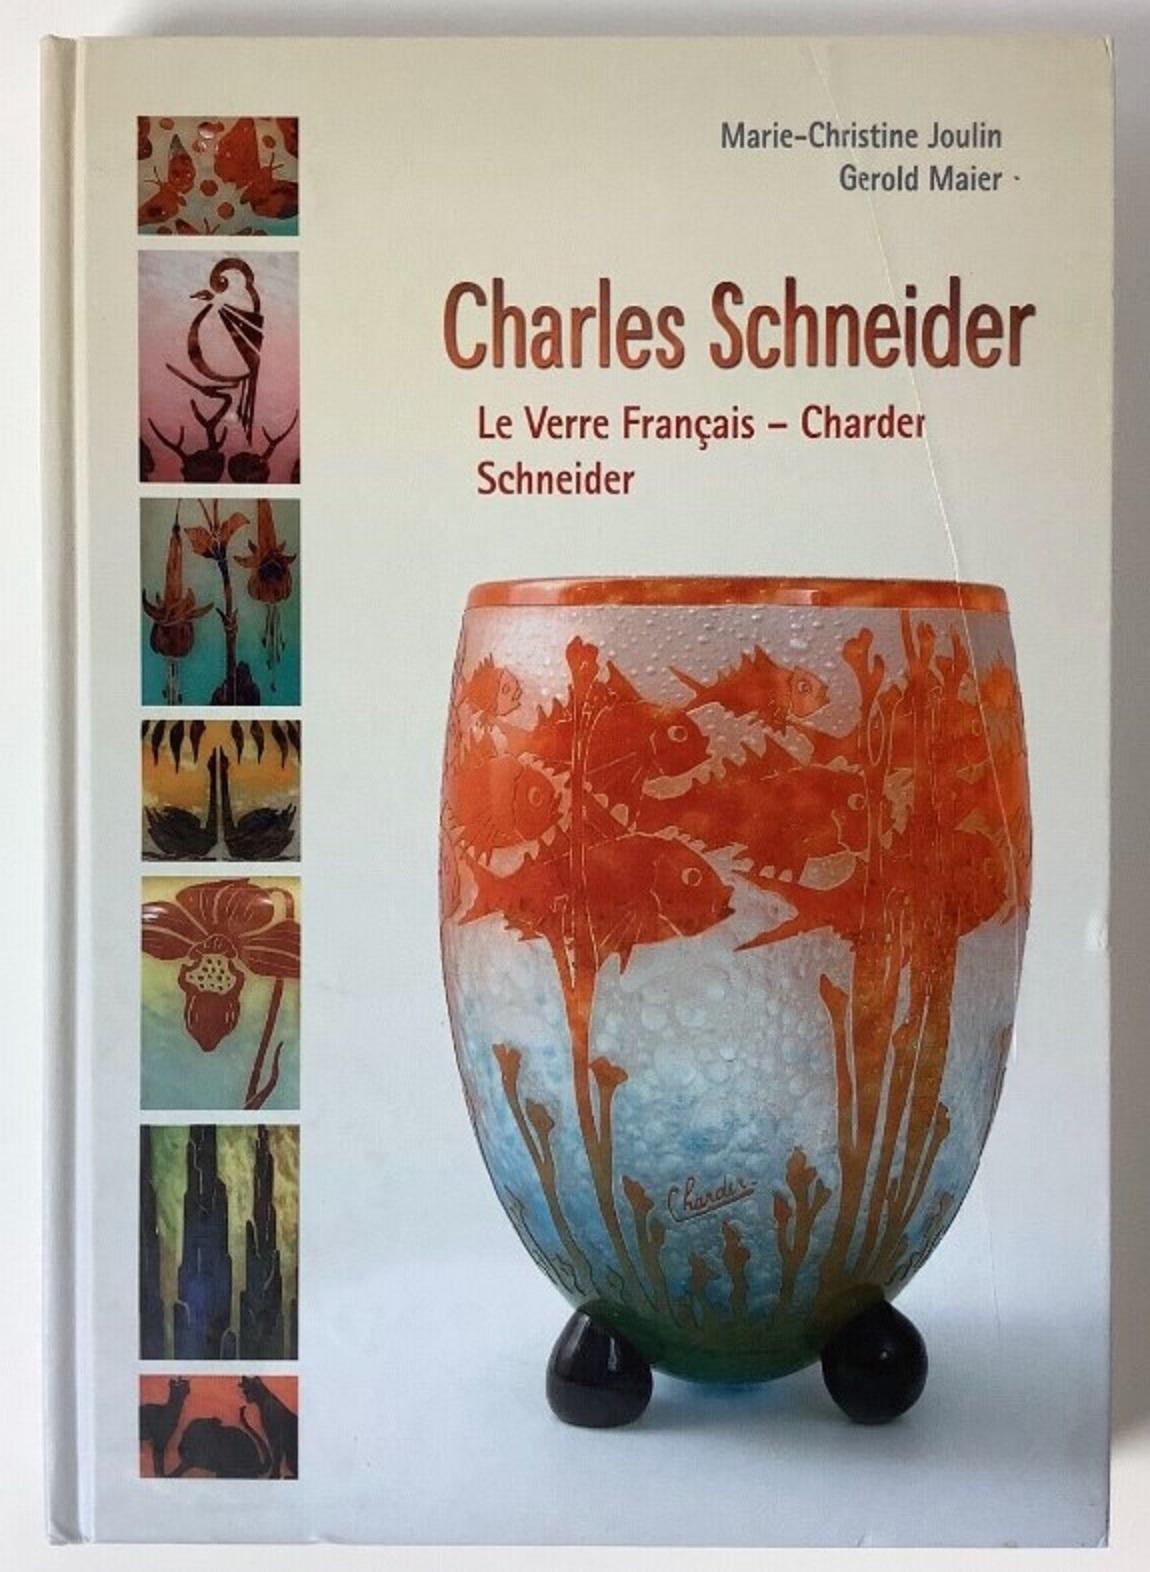 Vase Sign: Schneider 
Charles Schneider (1881-1953) studied art in two of most prestigious French school of the Arts. First in the School of Fine Arts in Nancy, then in the elite Ecole des Beaux Arts in Paris. While at Nancy, Charles became a